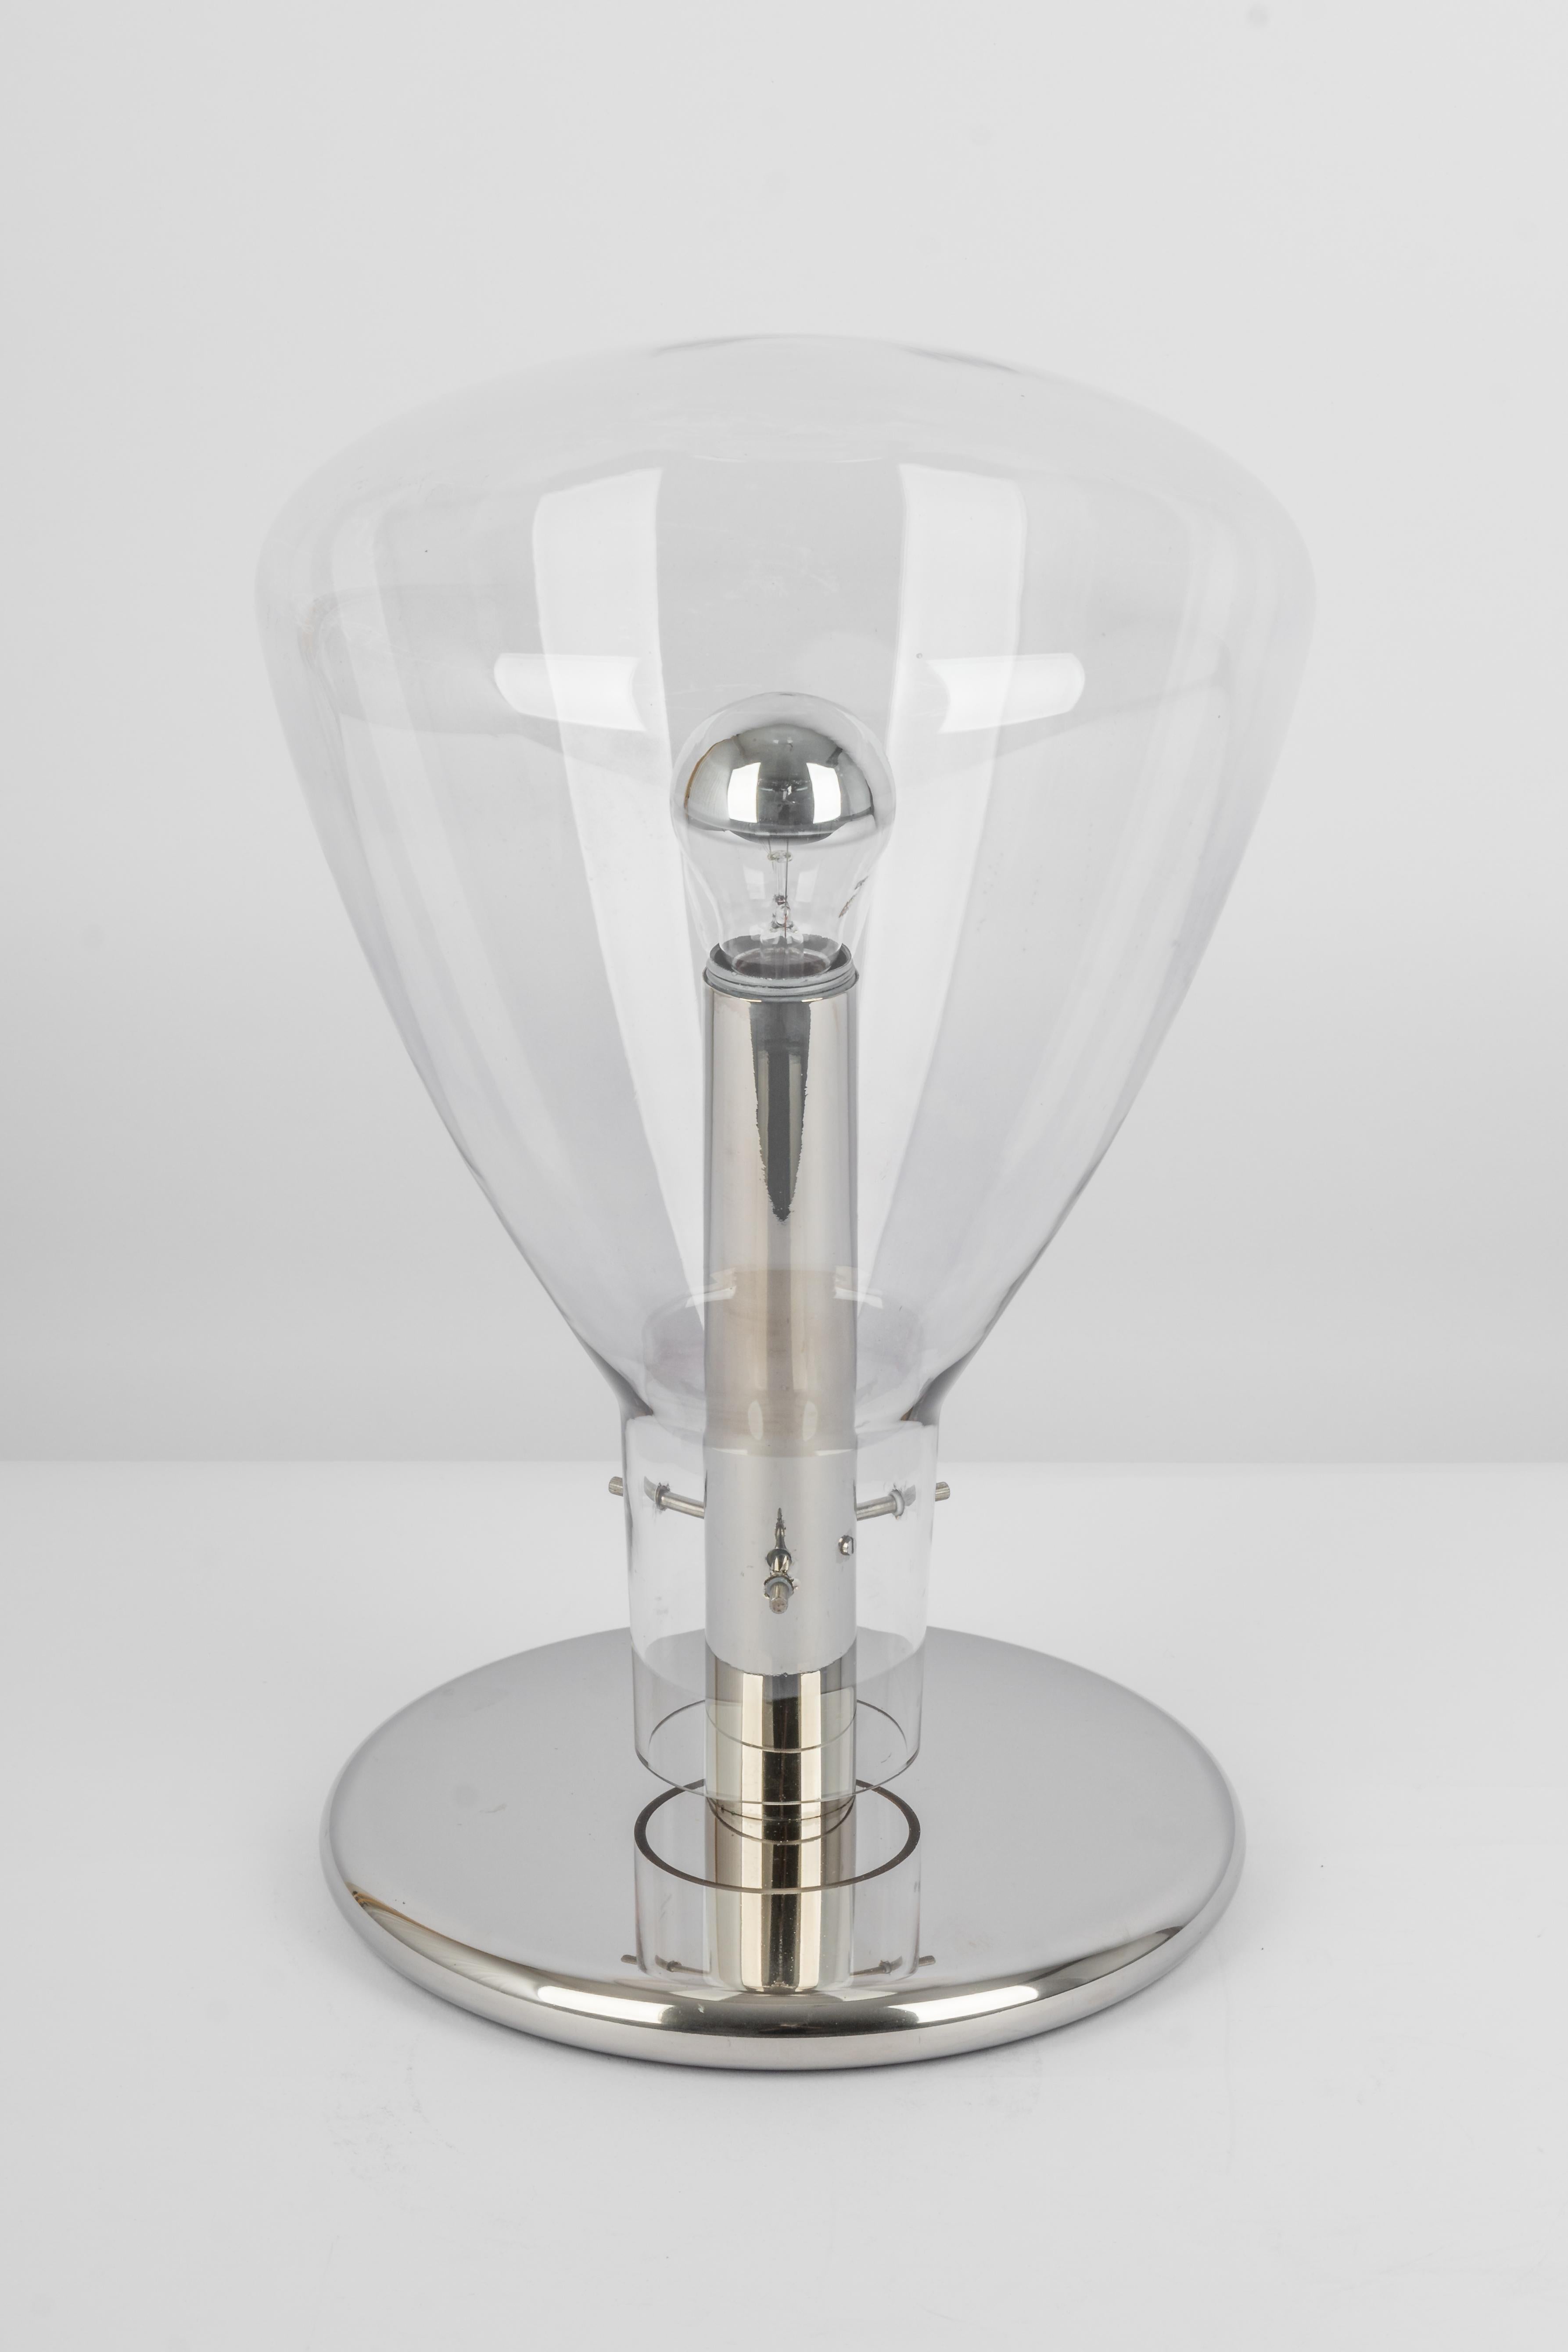 German Wonderful Glass Table Lamp designed by Temde, Switzerland, 1970s For Sale